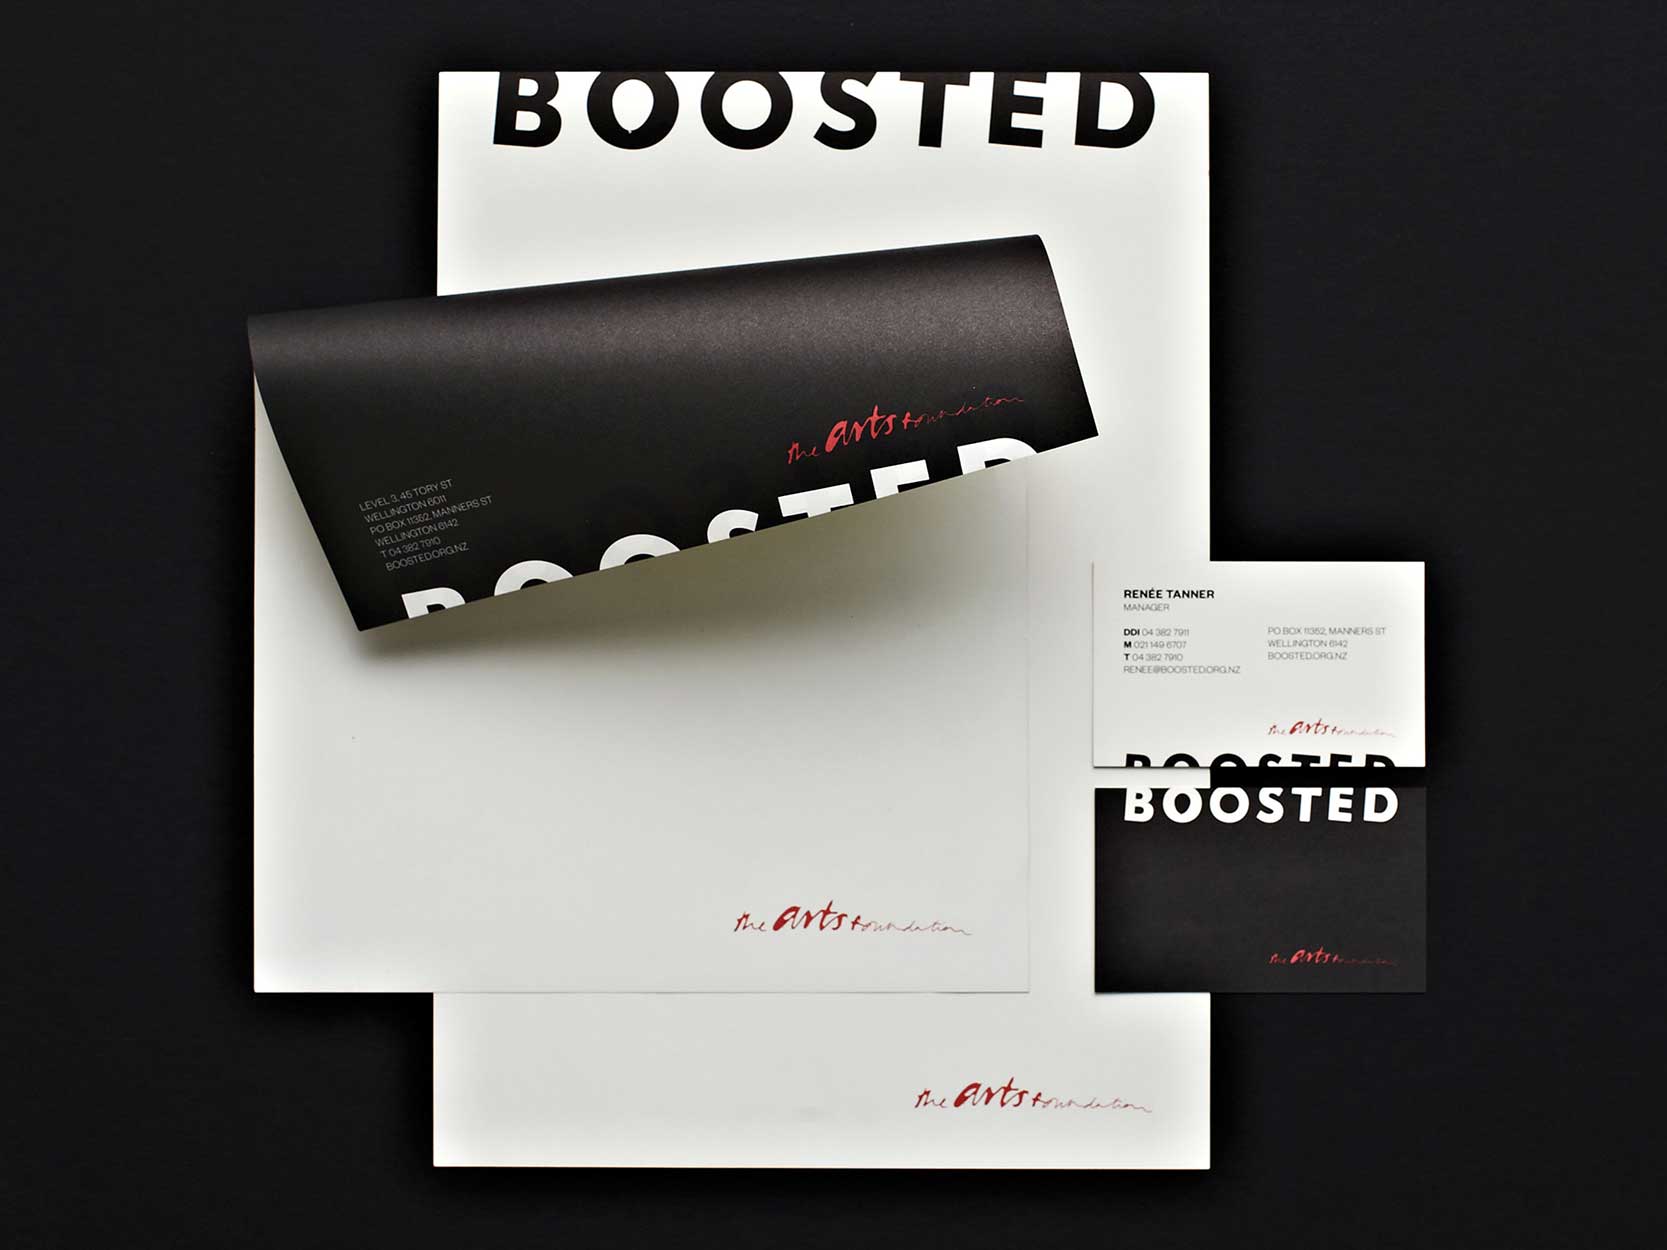 Boosted posters and business cards